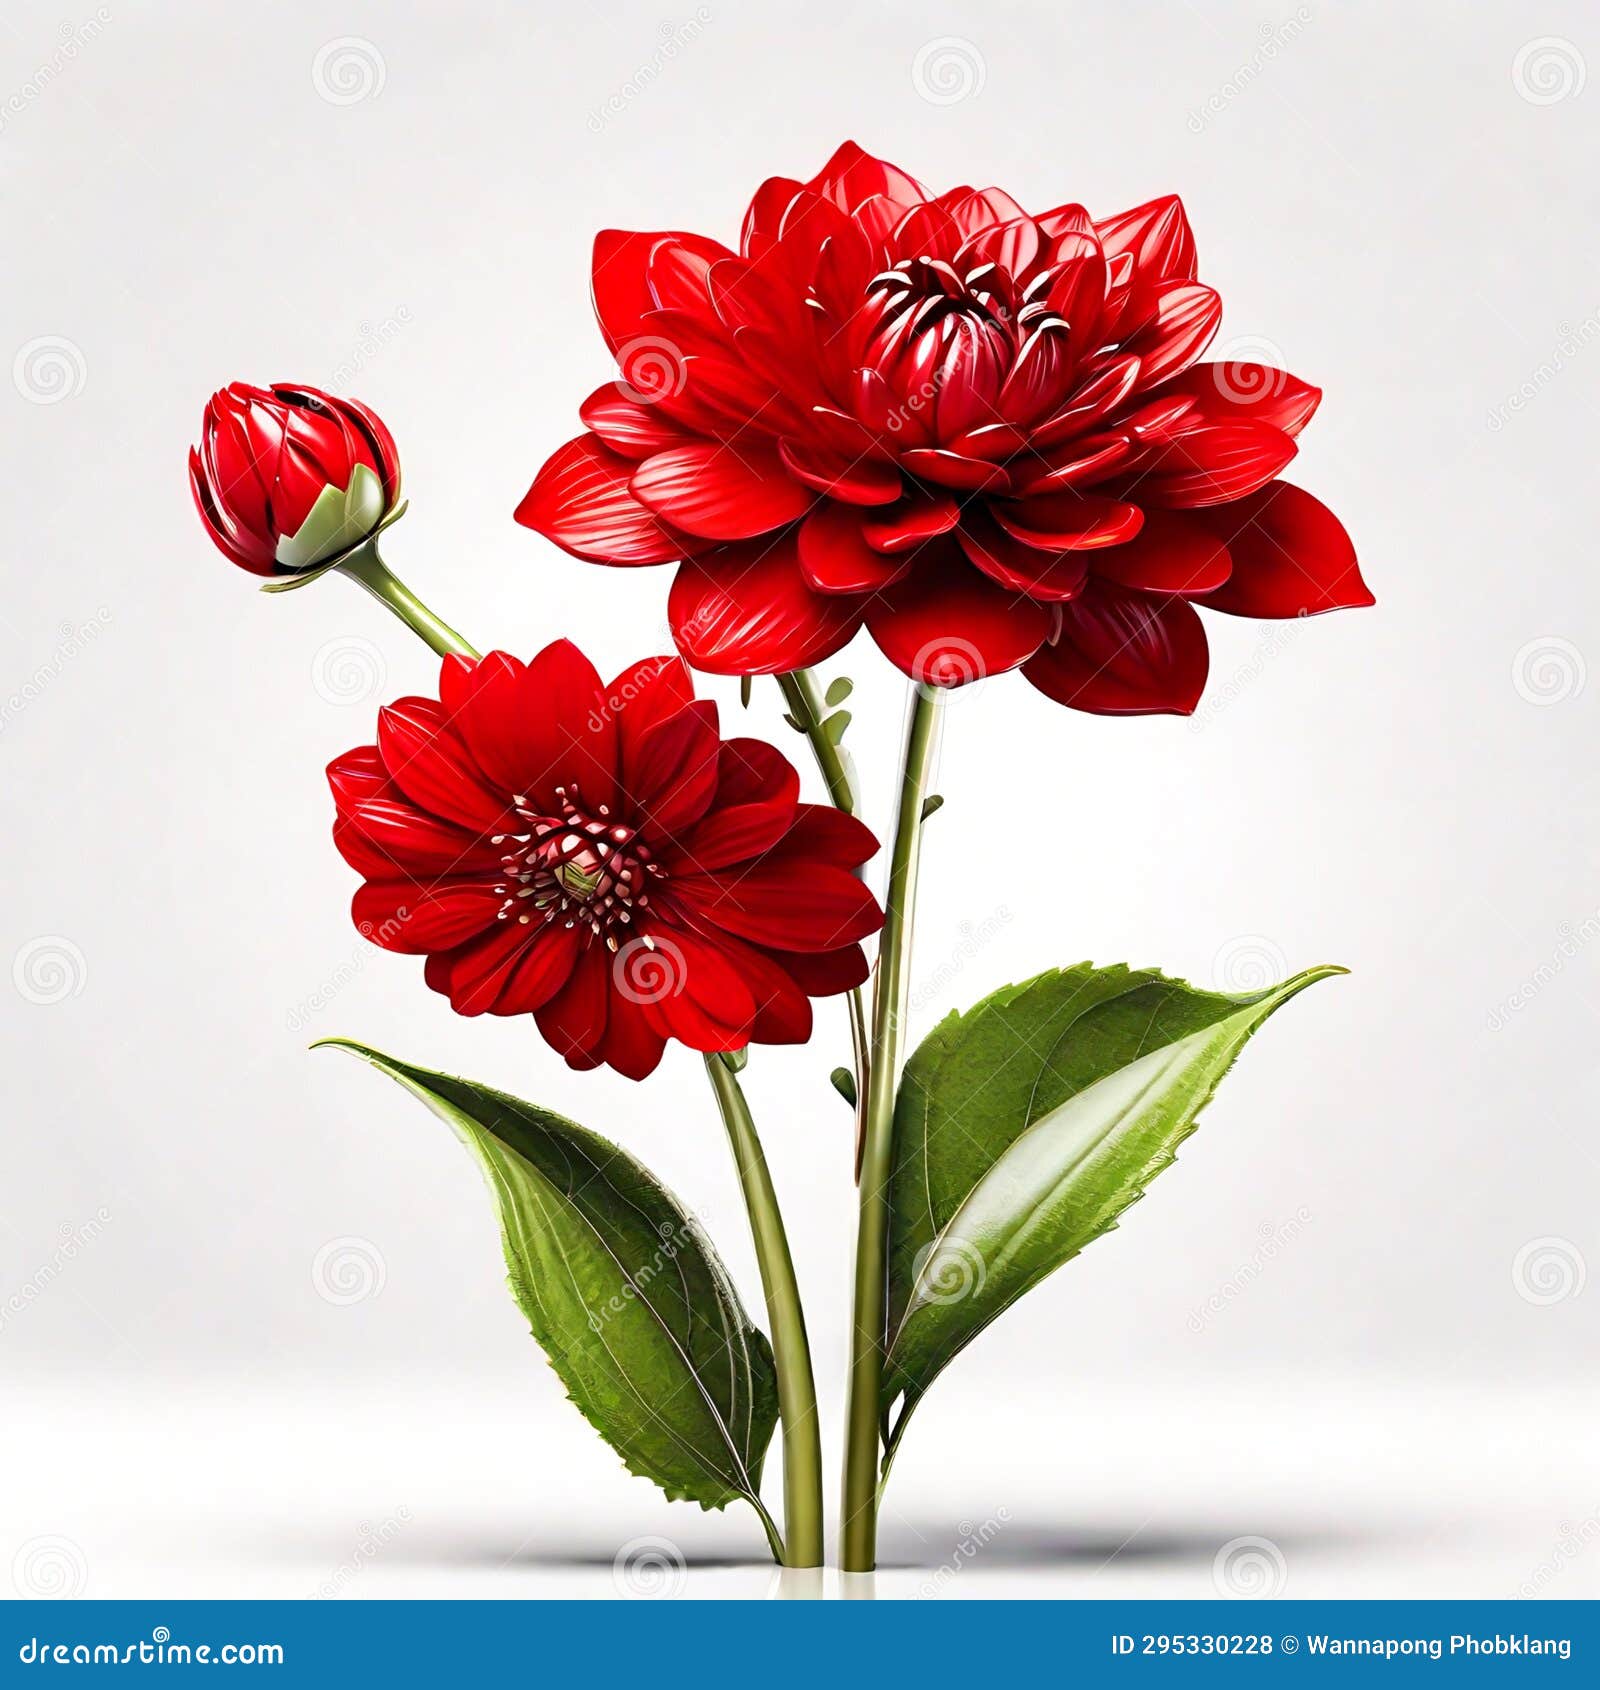 Romantic Red And Pink Flowers In A White Background Nature Beauty